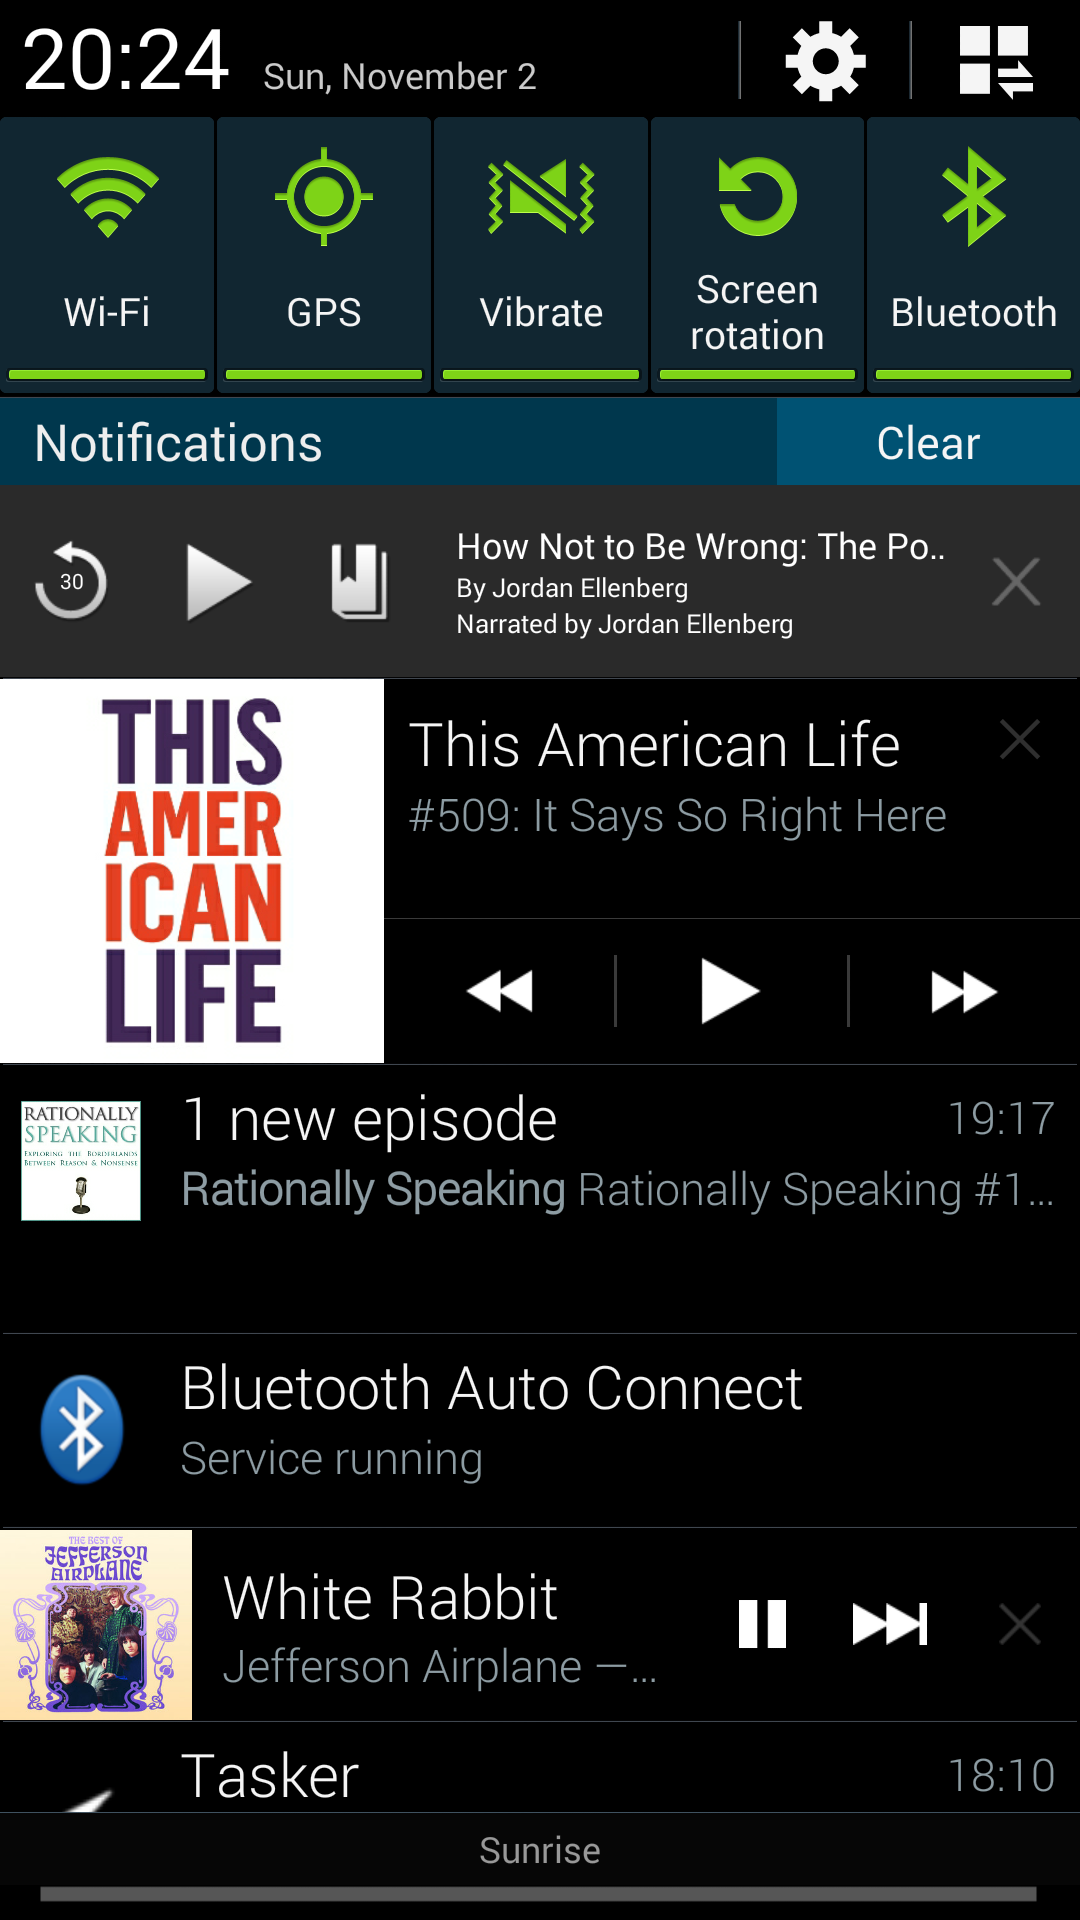 Notification overload, with lots of audio apps showing their controls in Android's notifications